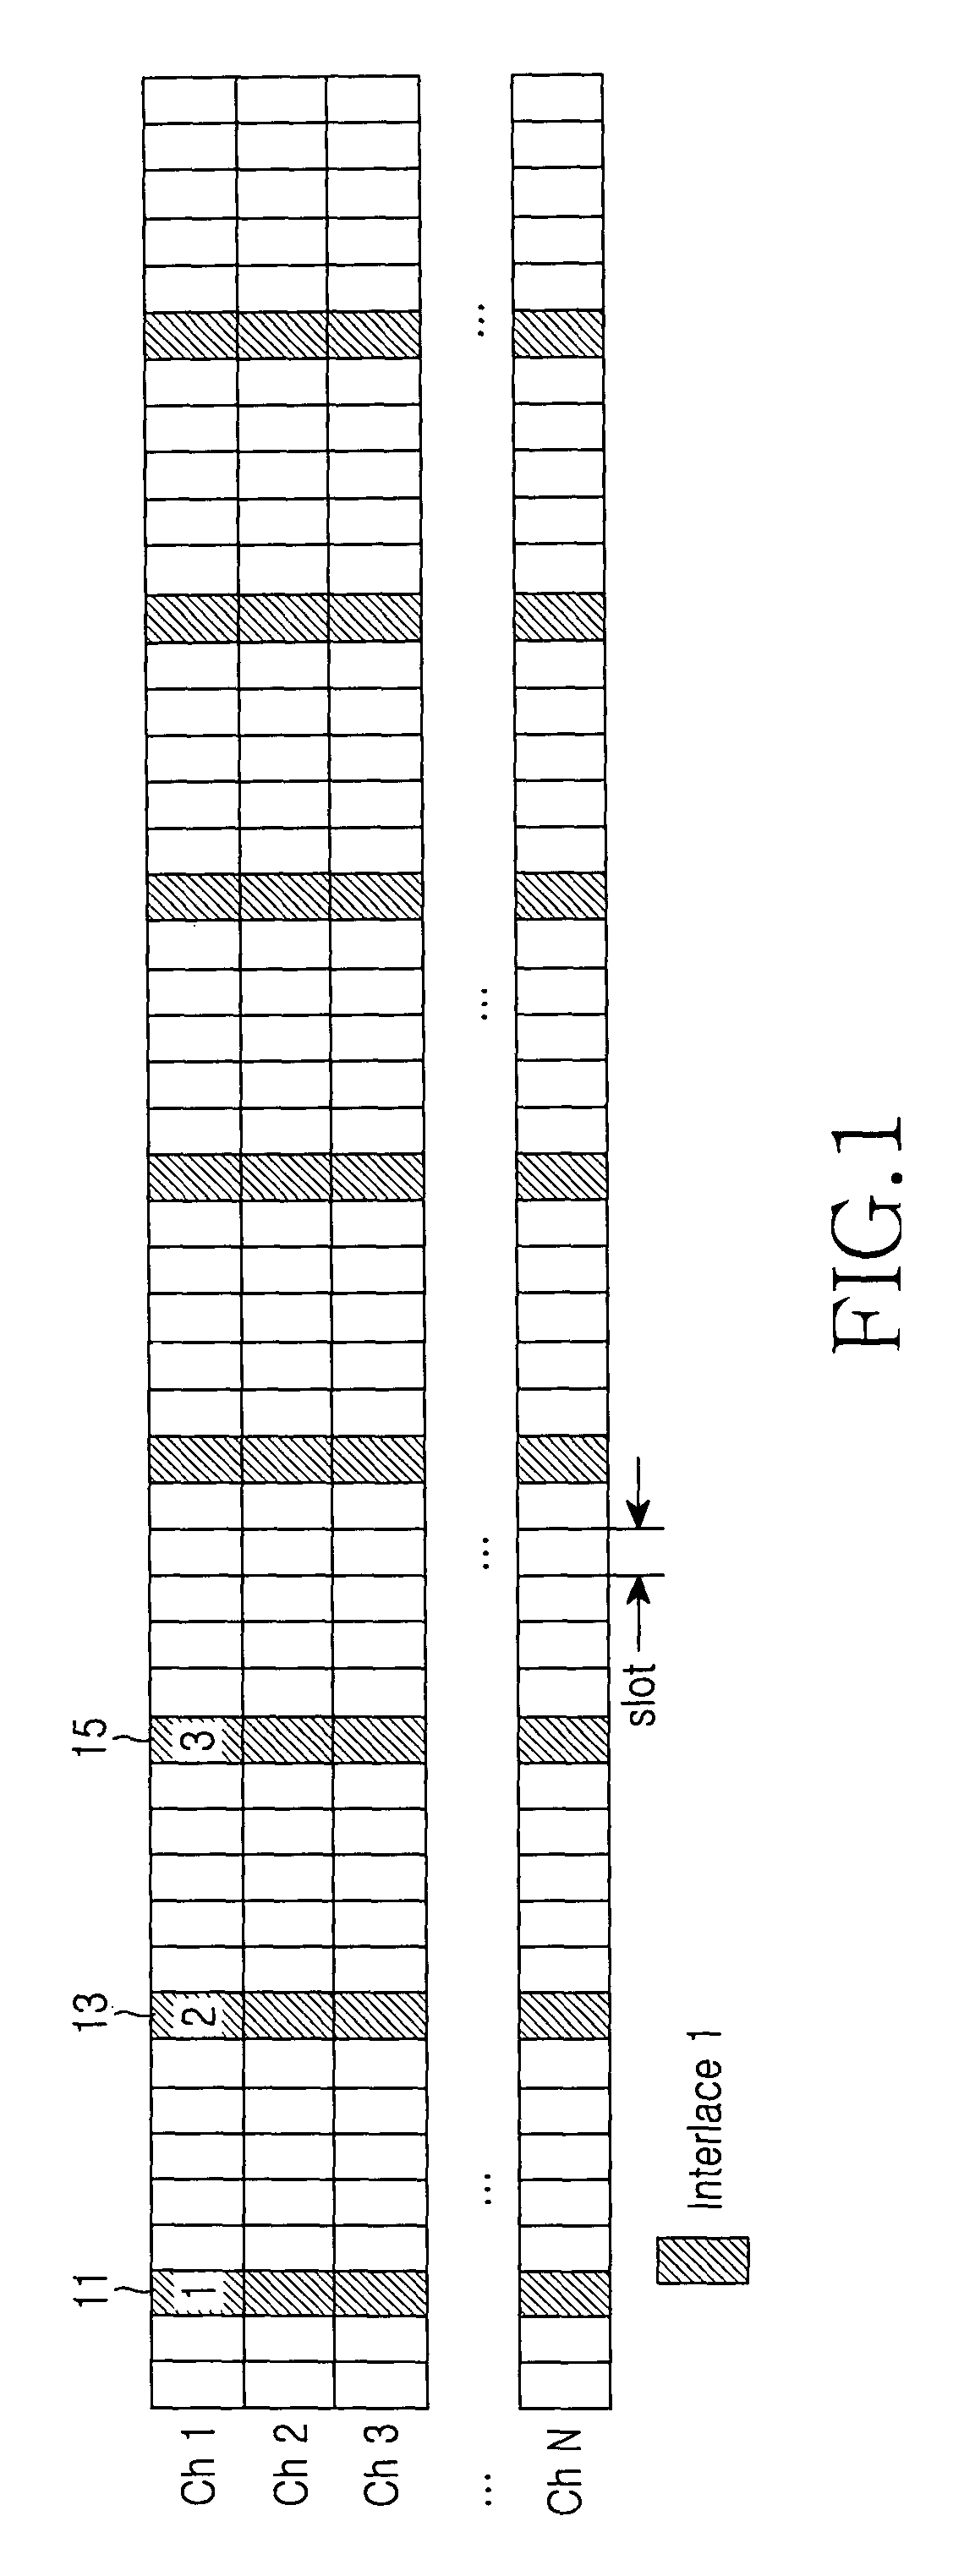 Hybrid automatic repeat request method in a mobile communication system and transmission/reception method and apparatus using the same